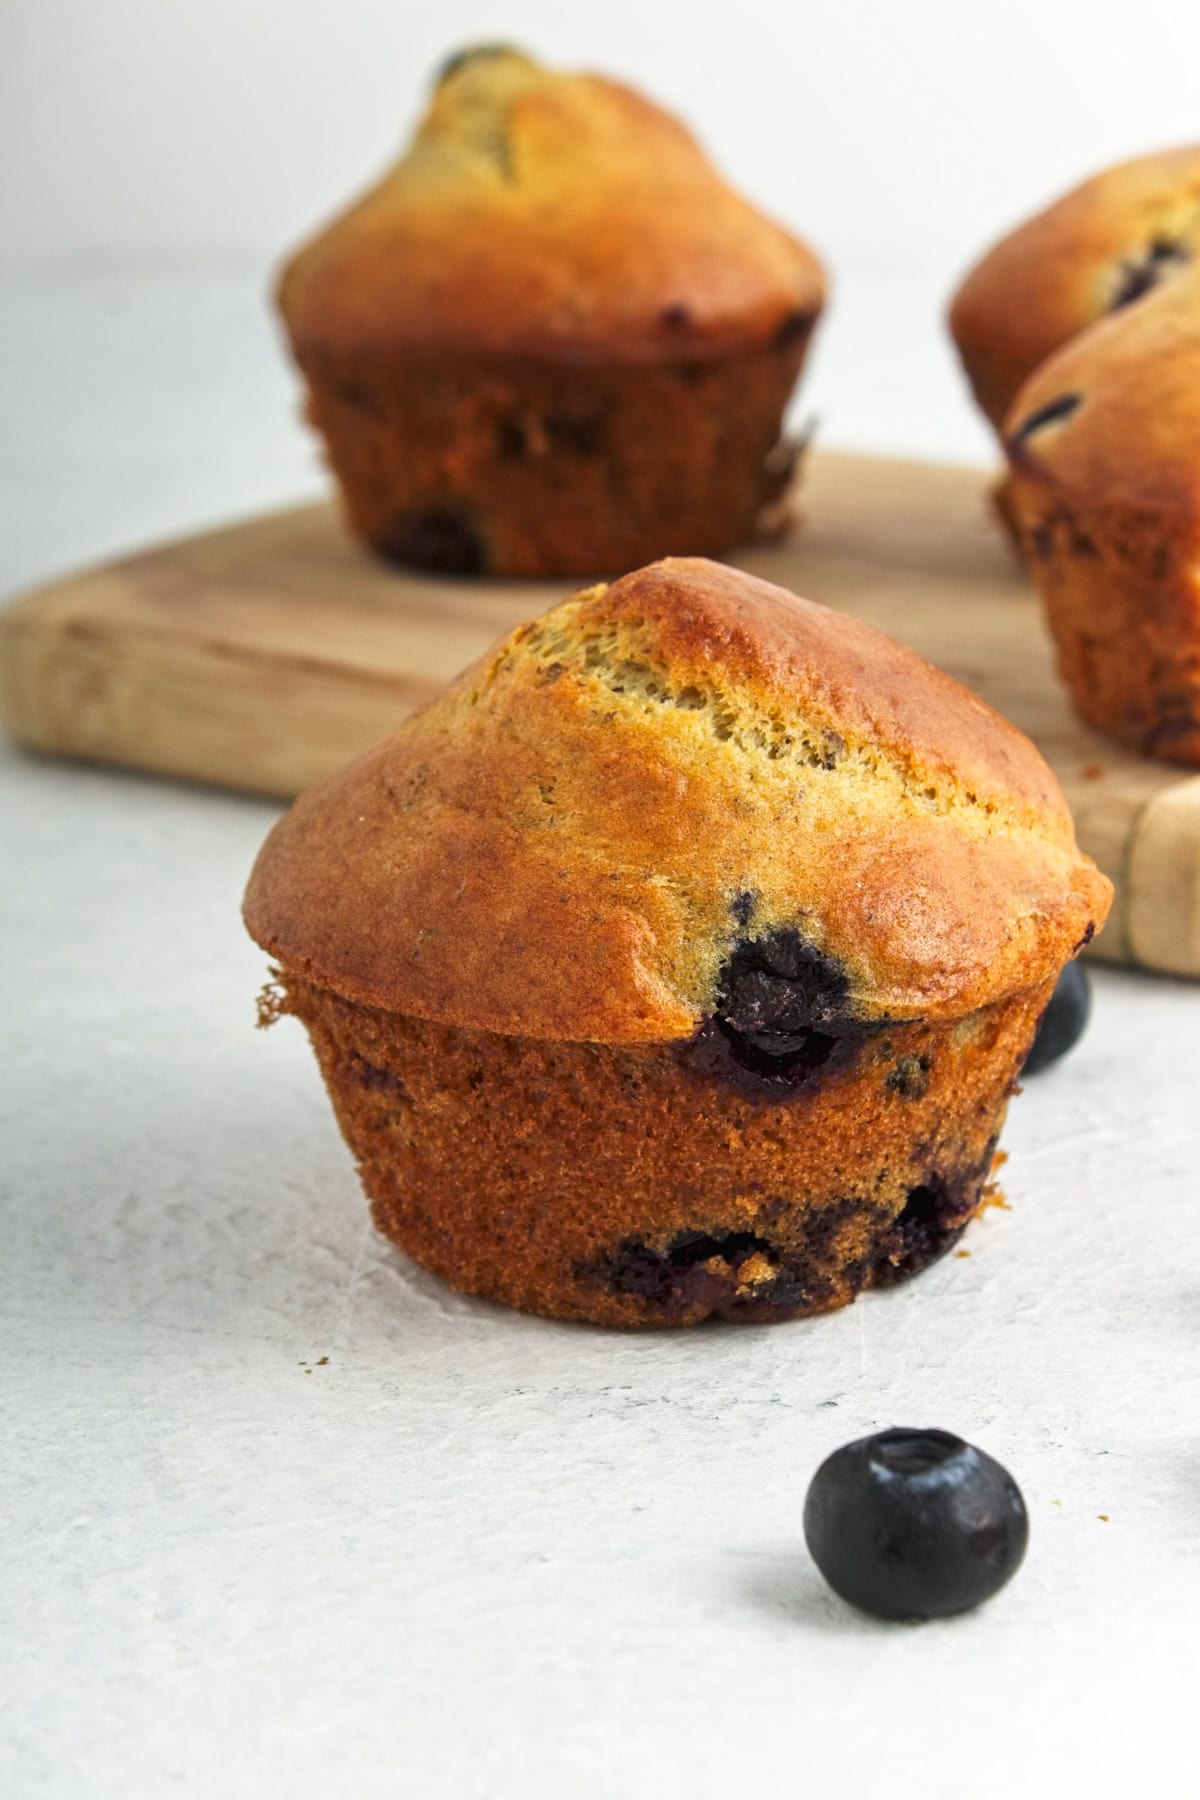 A golden brown muffin containing blueberries.